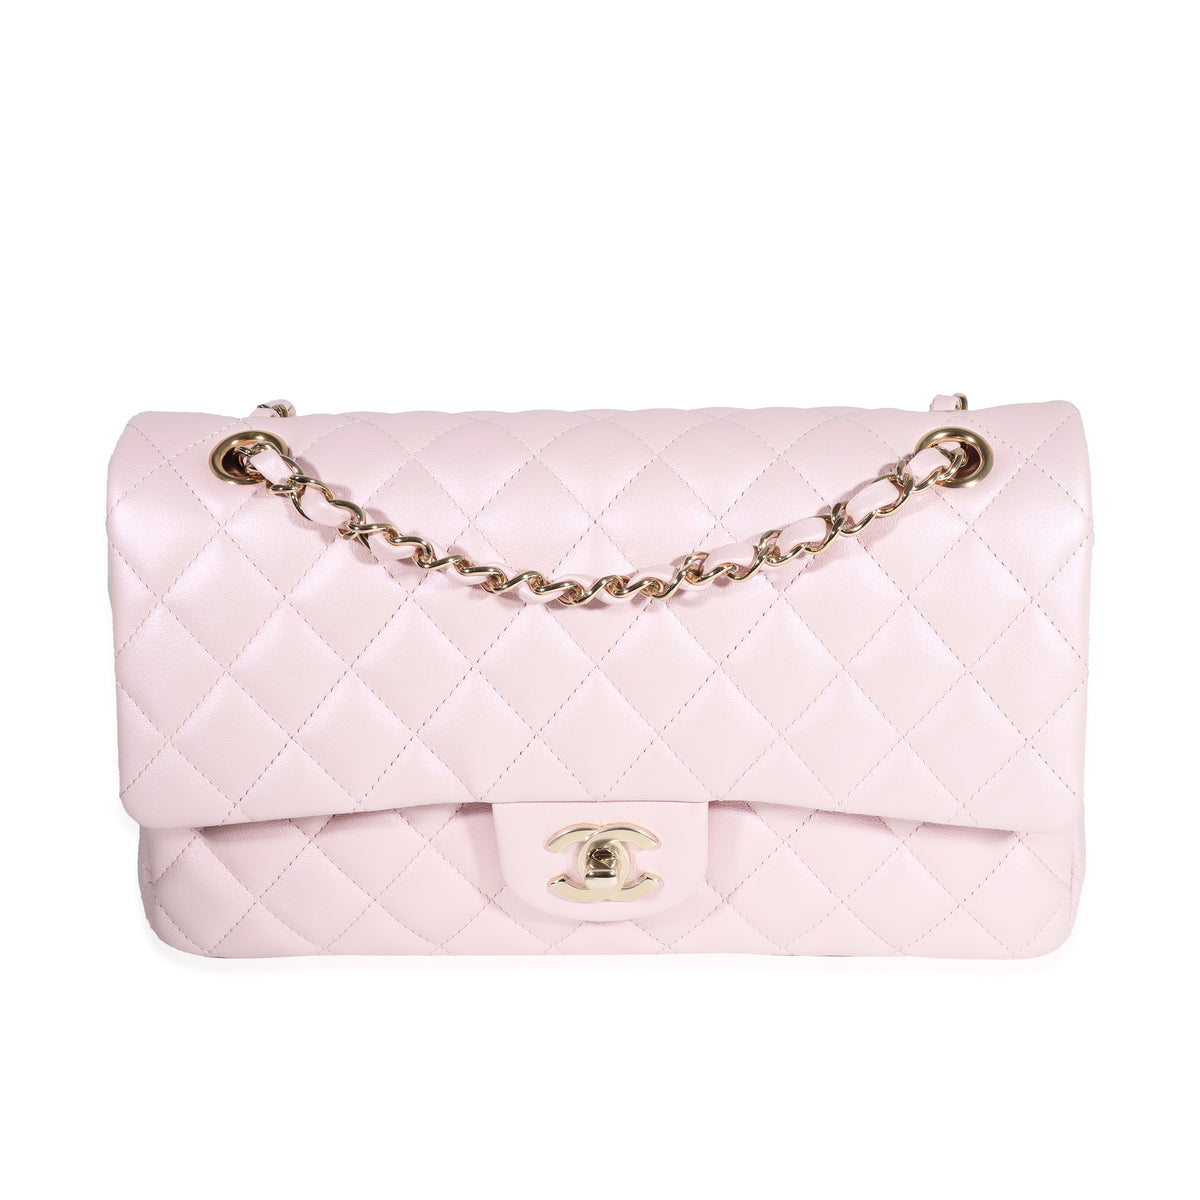 Chanel Iridescent Pink Quilted Lambskin Medium Classic Double Flap Bag, myGemma, SG